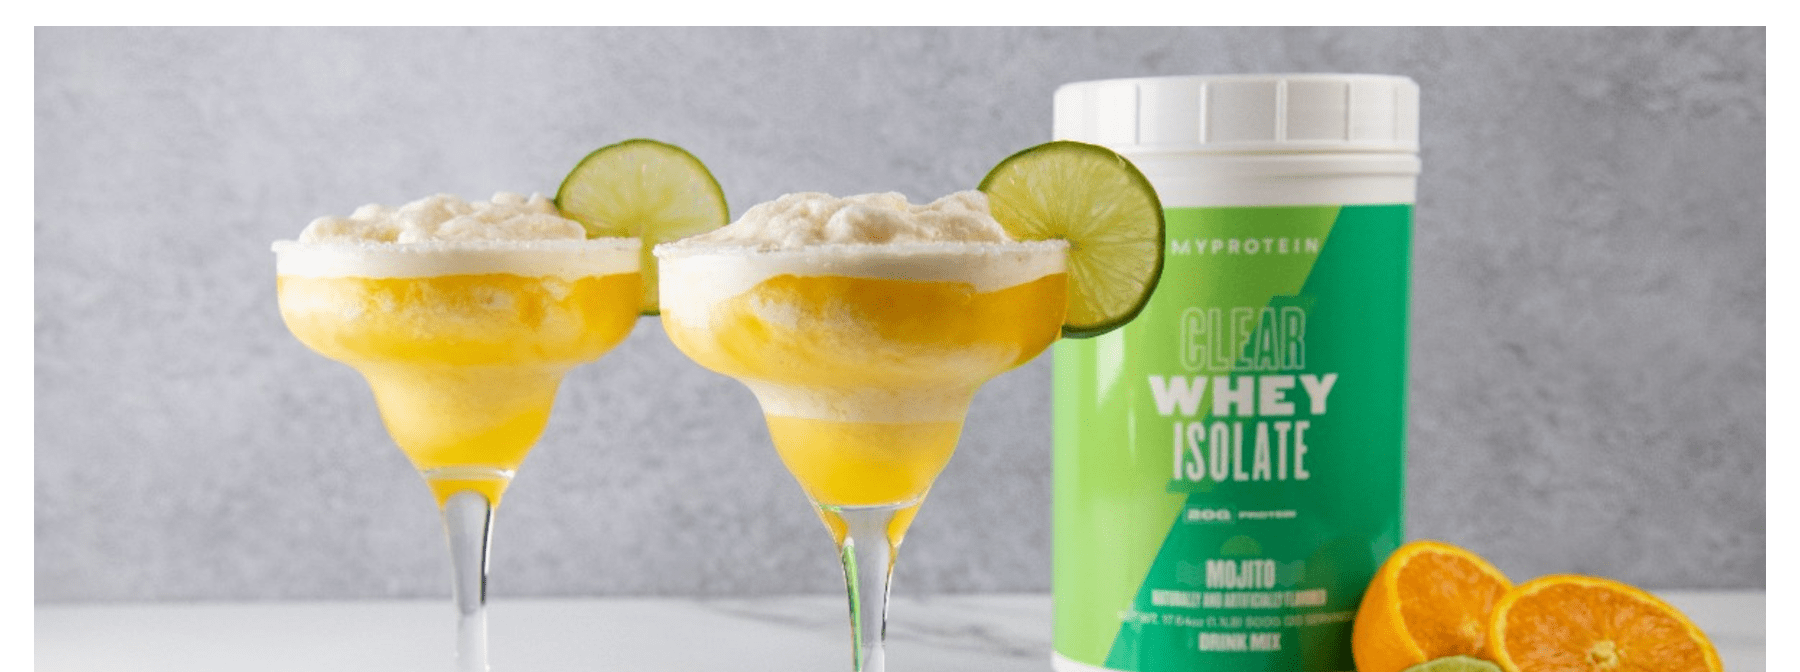 3 Clear Whey Isolate Mocktail Recipes | Healthy Non-Alcoholic Cocktails